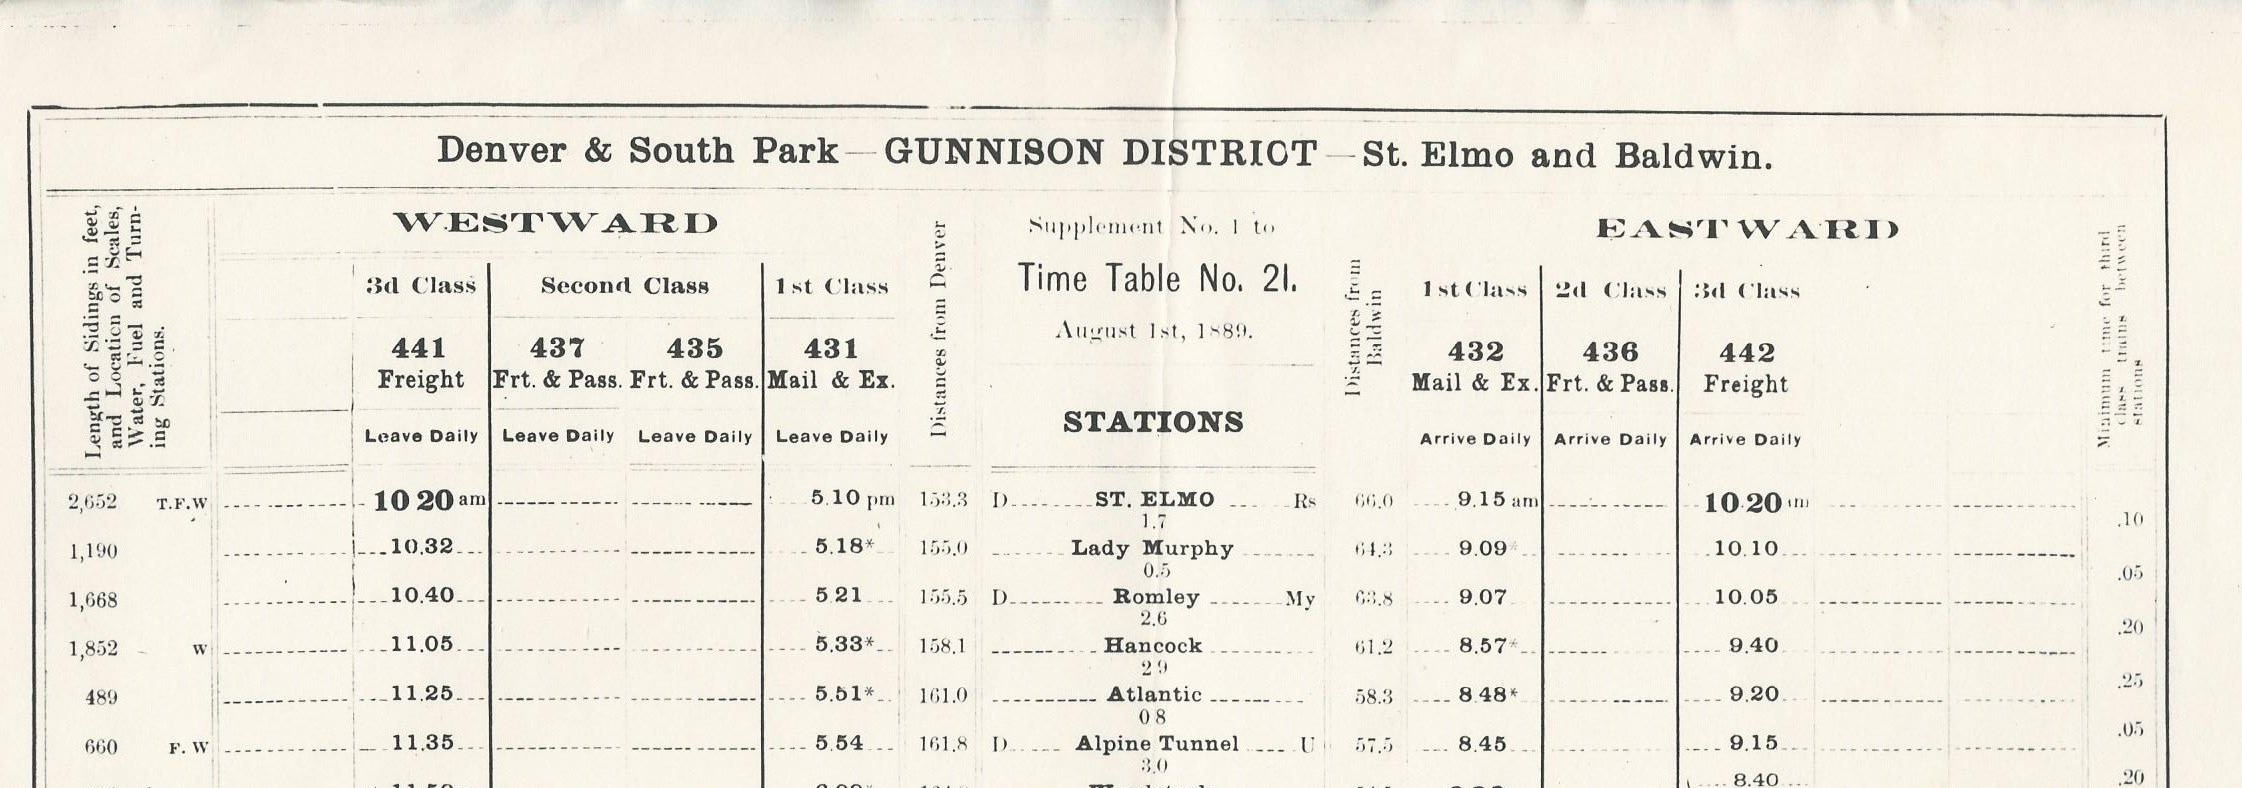 DSP&amp;P Time Table Gunnison District Sup No. 1 to TT 21  Aug 1 1889 a.jpeg